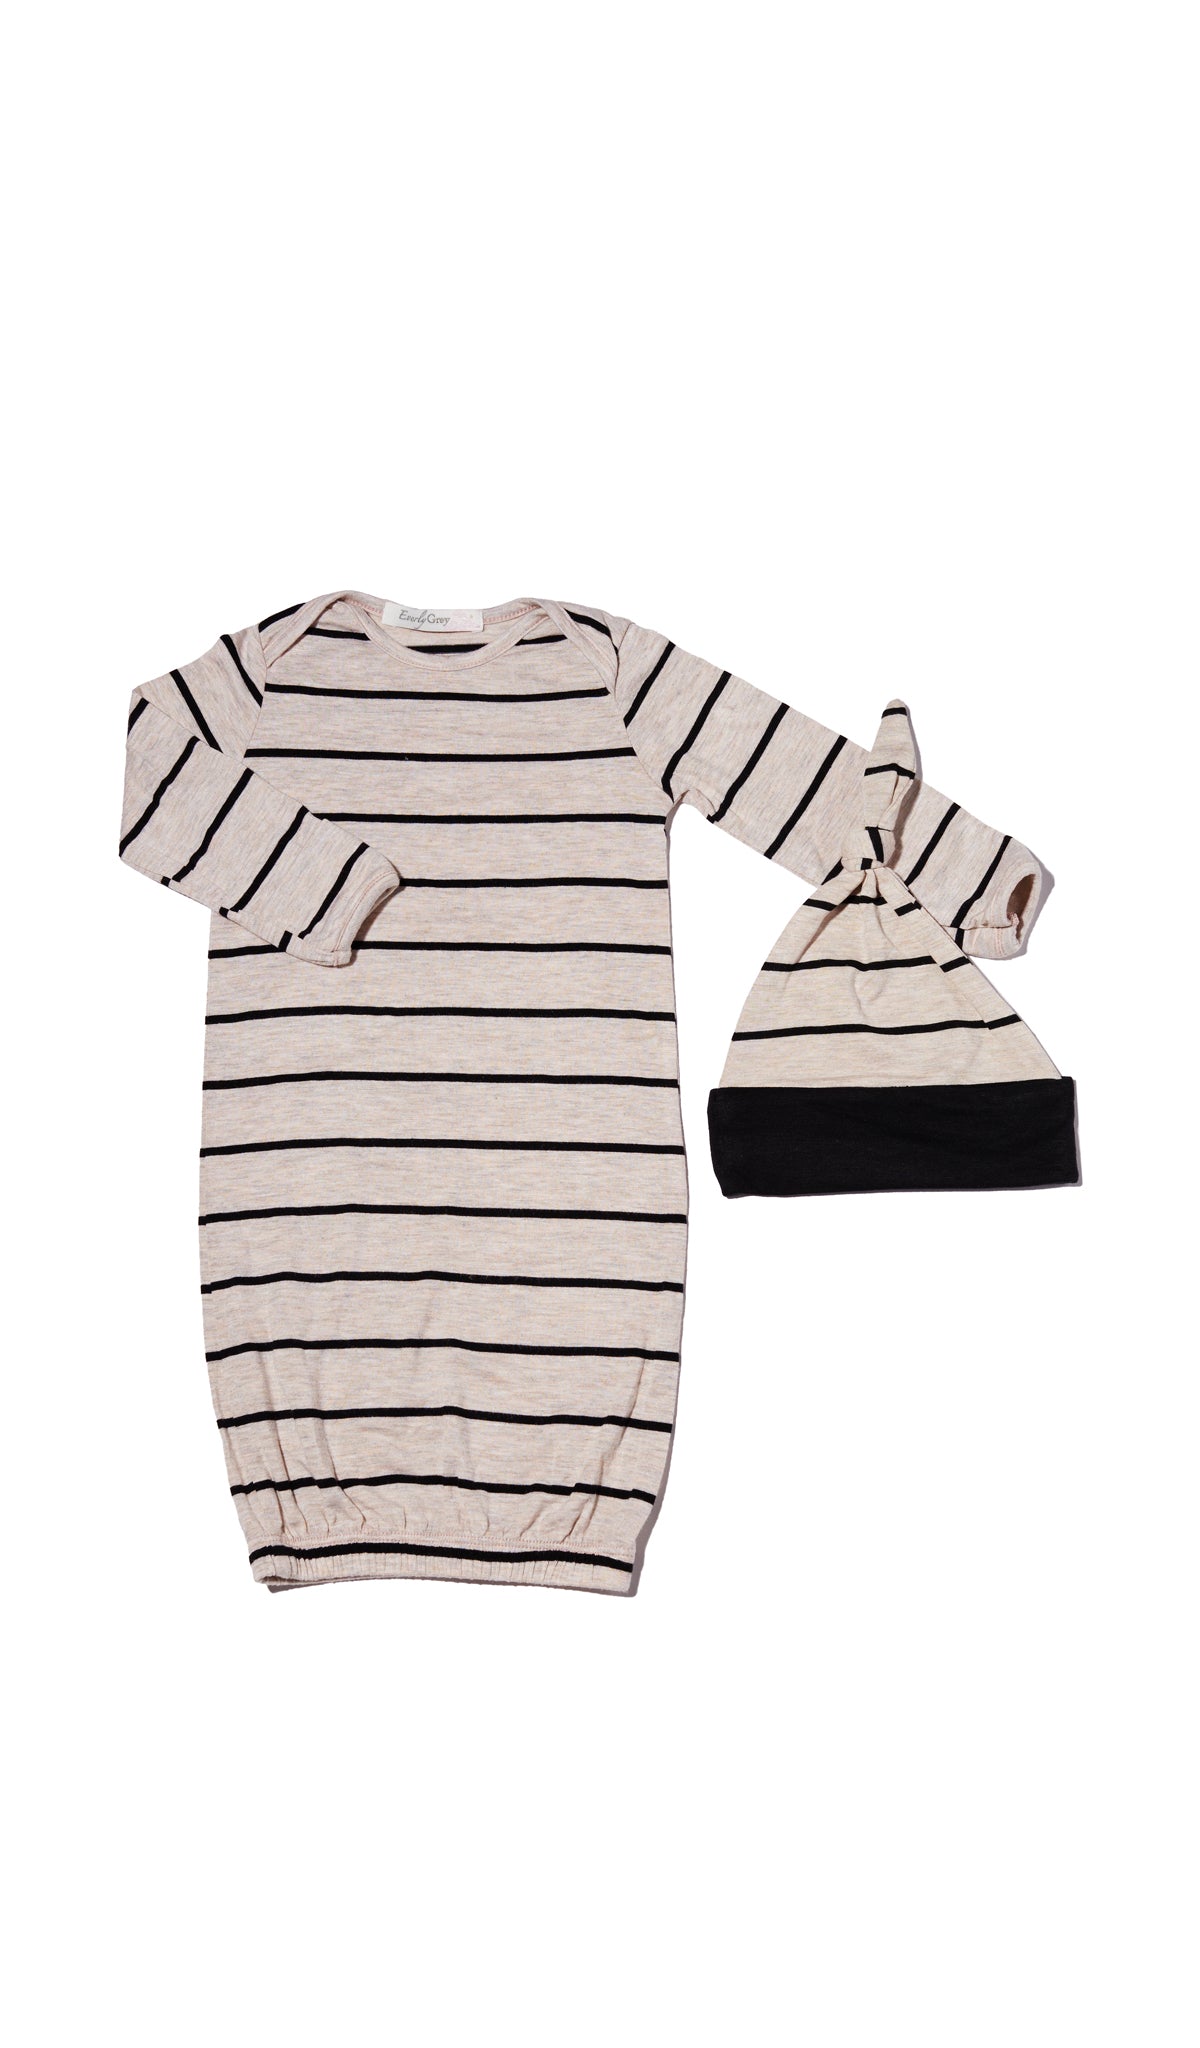 Sand Stripe Gown 2-Piece with long sleeve baby gown and matching knotted hat.